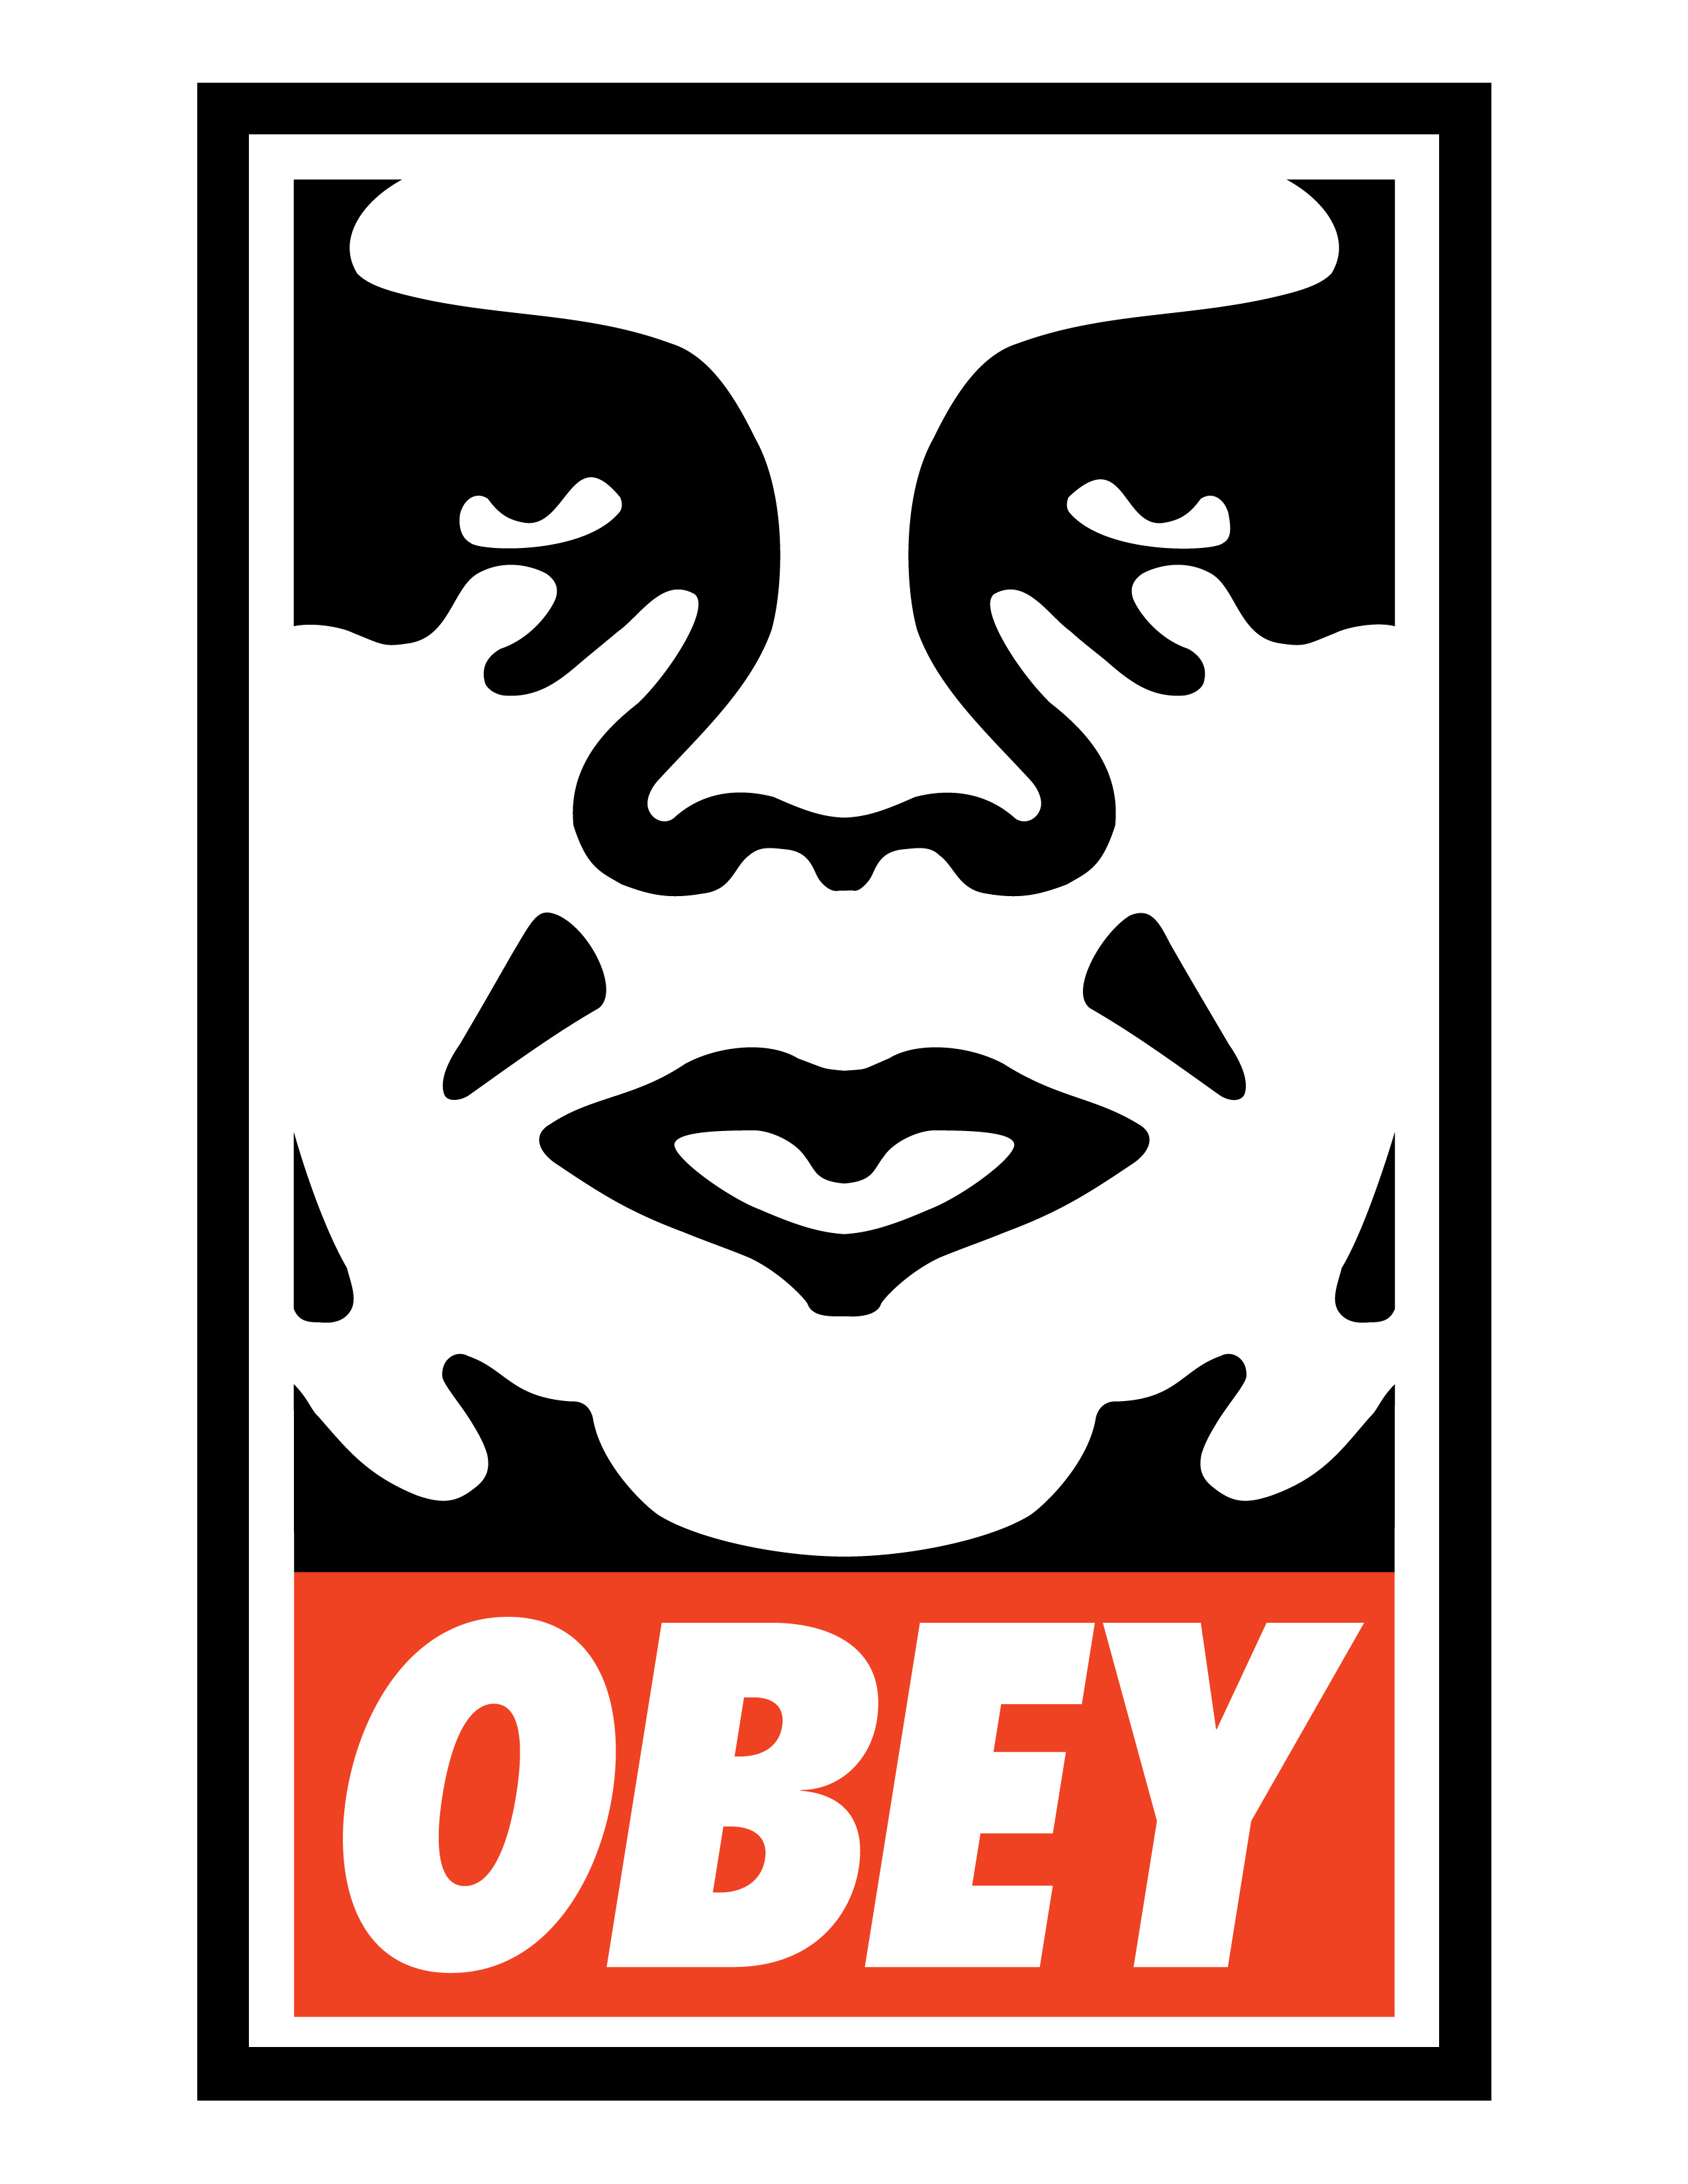 Fairey Obey